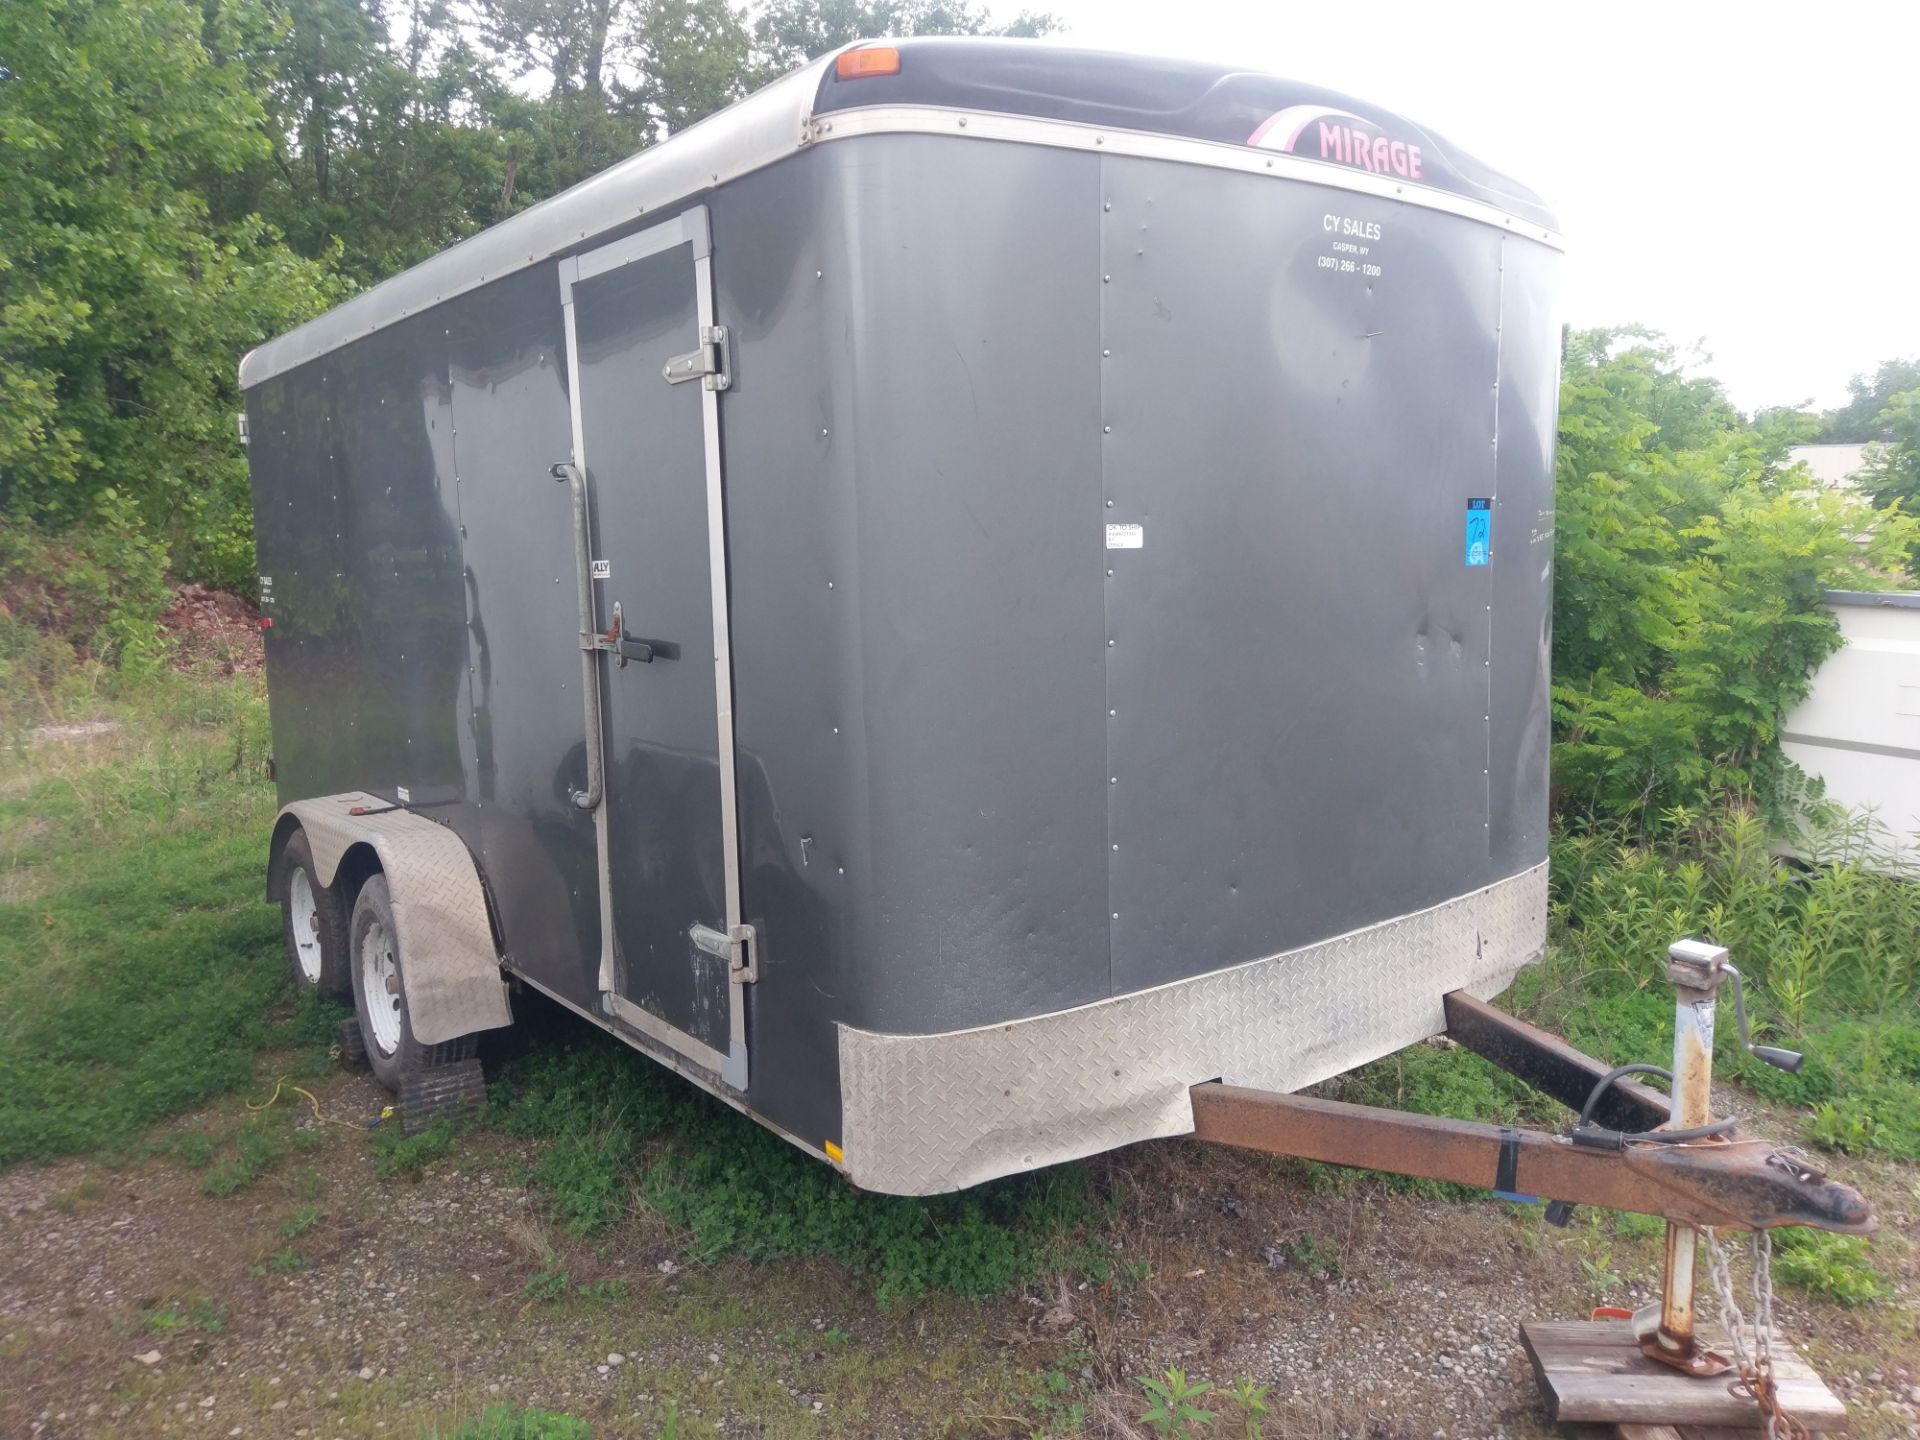 2011 MIRAGE TANDEM AXLE ENCLOSED TRAILER; VIN # 5M3BE1420B1047702, BALL HITCH, 7' X 15', DOUBLE REAR - Image 2 of 5